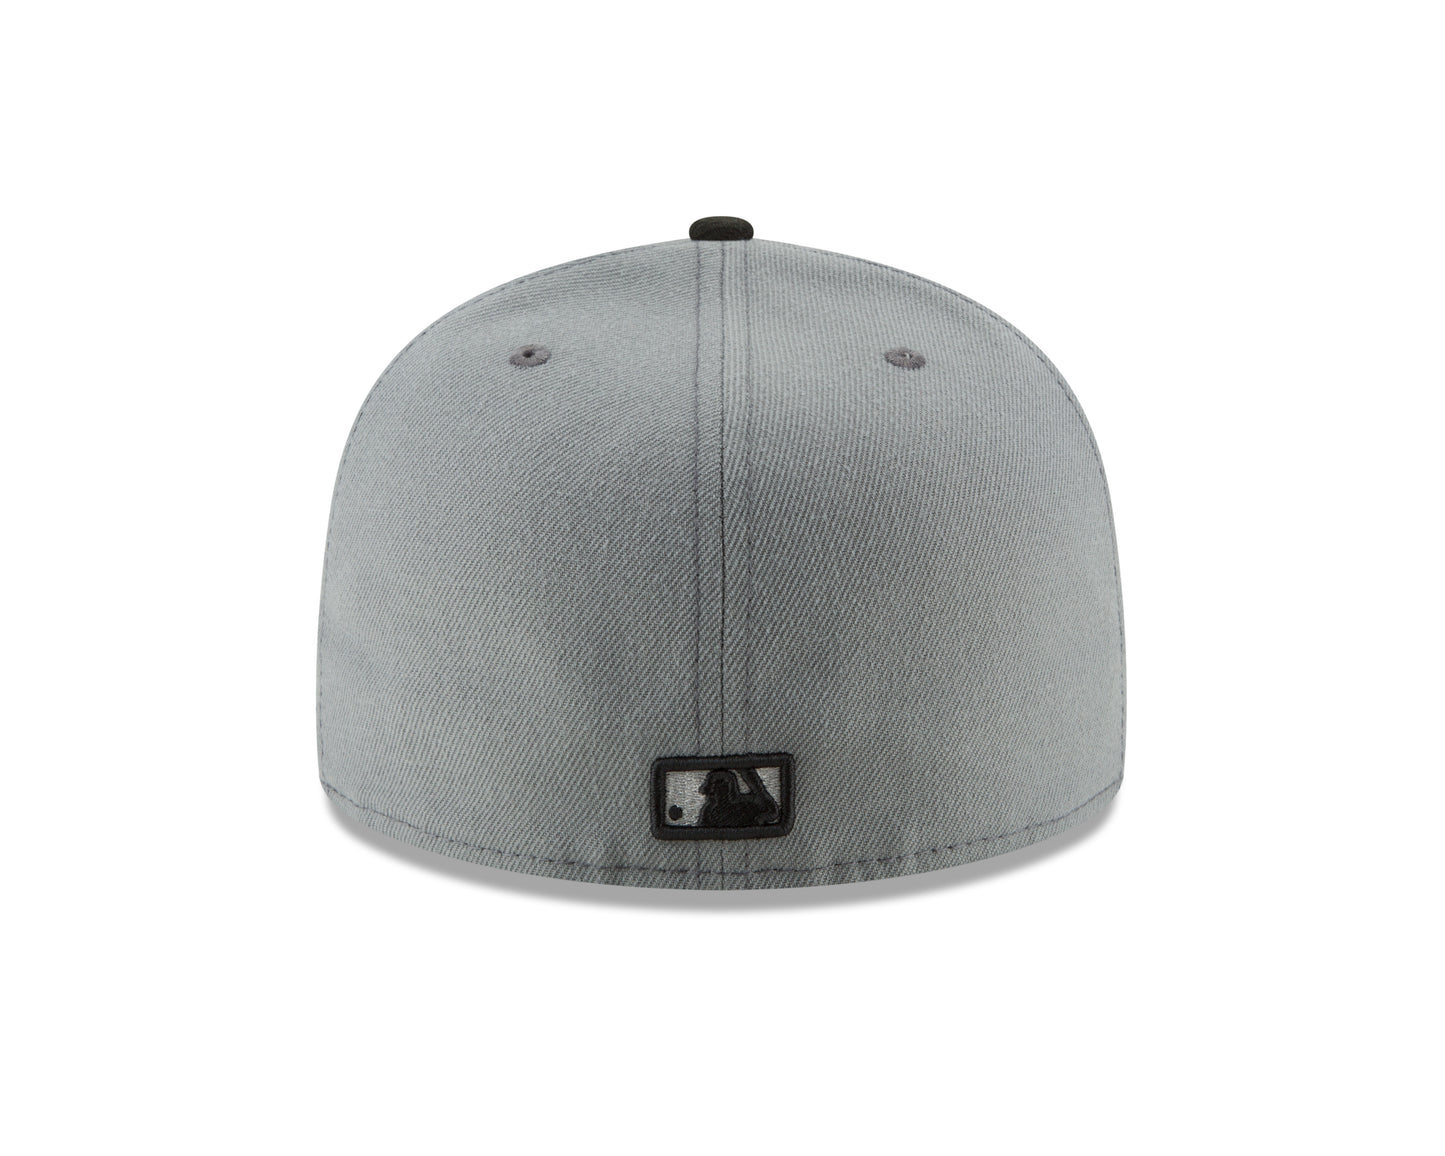 Chicago White Sox New Era MLB Basic Gray & Black 59fifty Fitted Hat